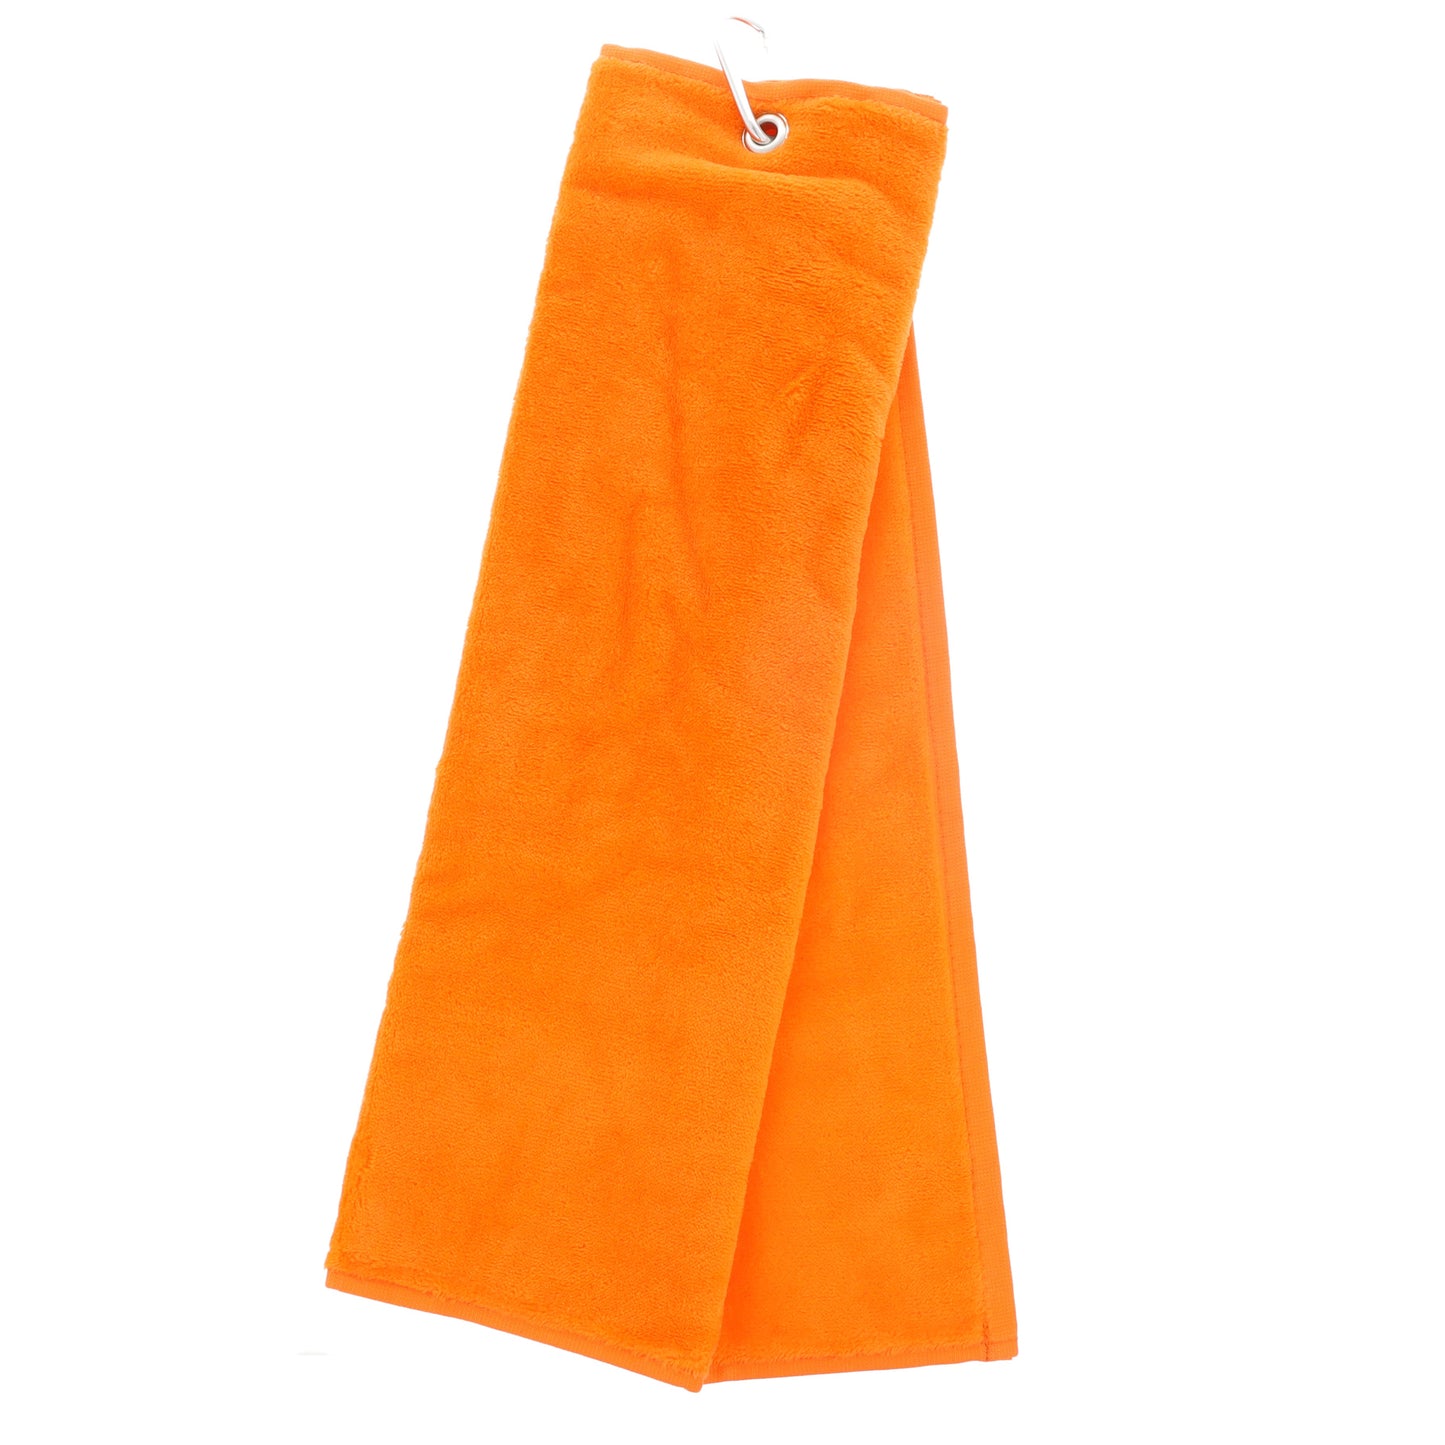 Personalised Embroidered Tri Fold GOLF Towel Trifold Towel with Carabiner Clip  - Always Looking Good - Orange  